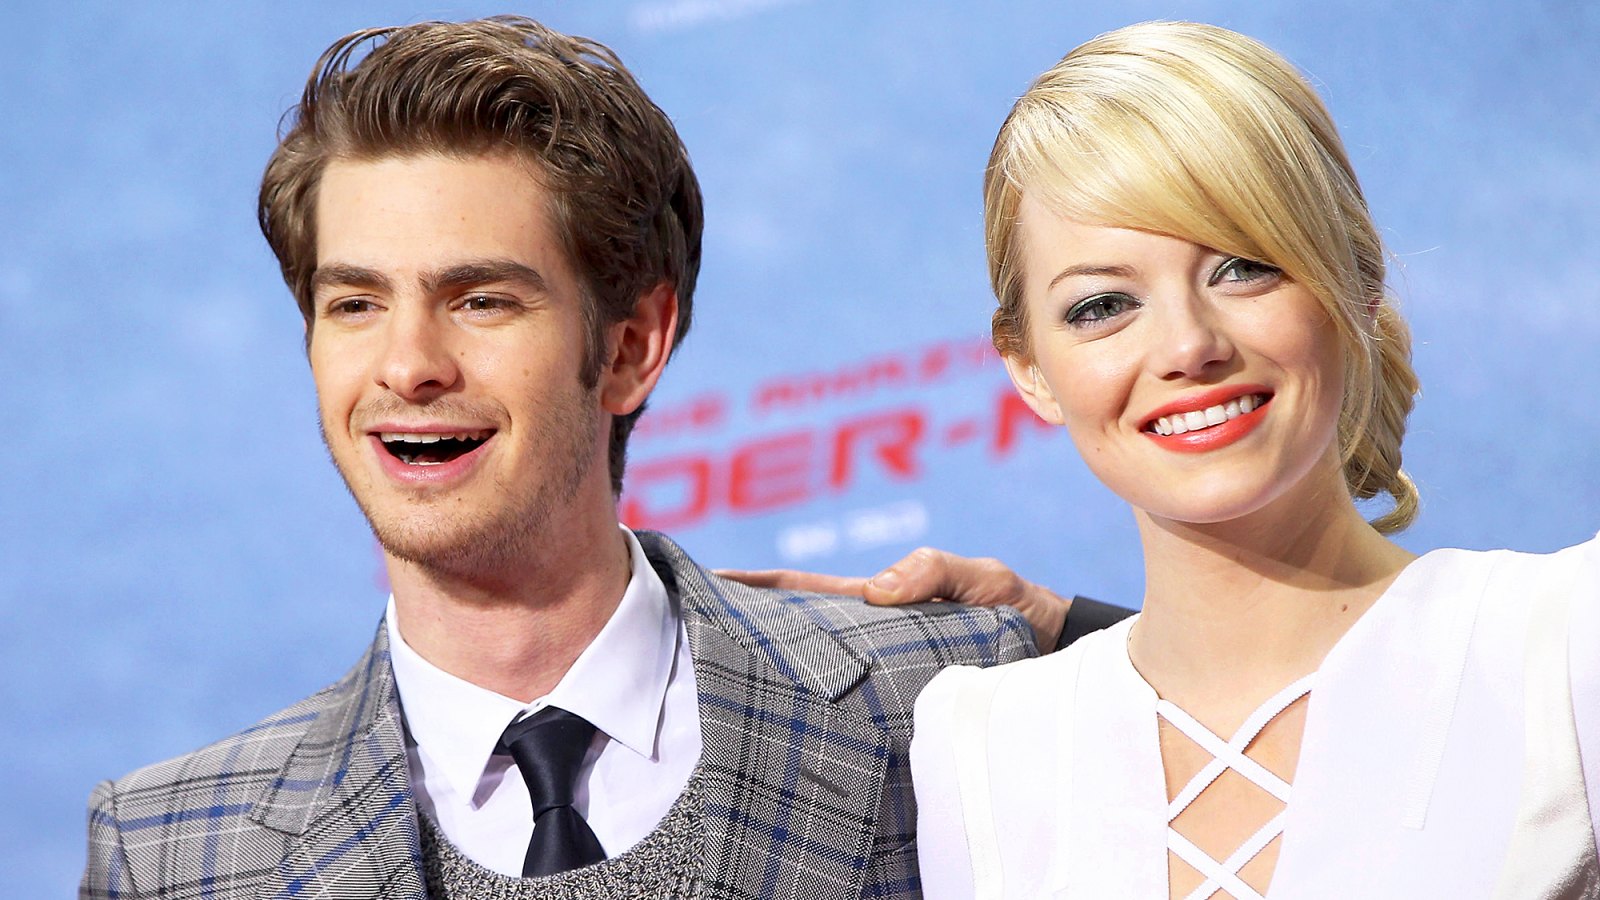 Andrew Garfield and Emma Stone attend the premiere of "The Amazing Spider-Man" at Sony Center on June 20, 2012 in Berlin, Germany.